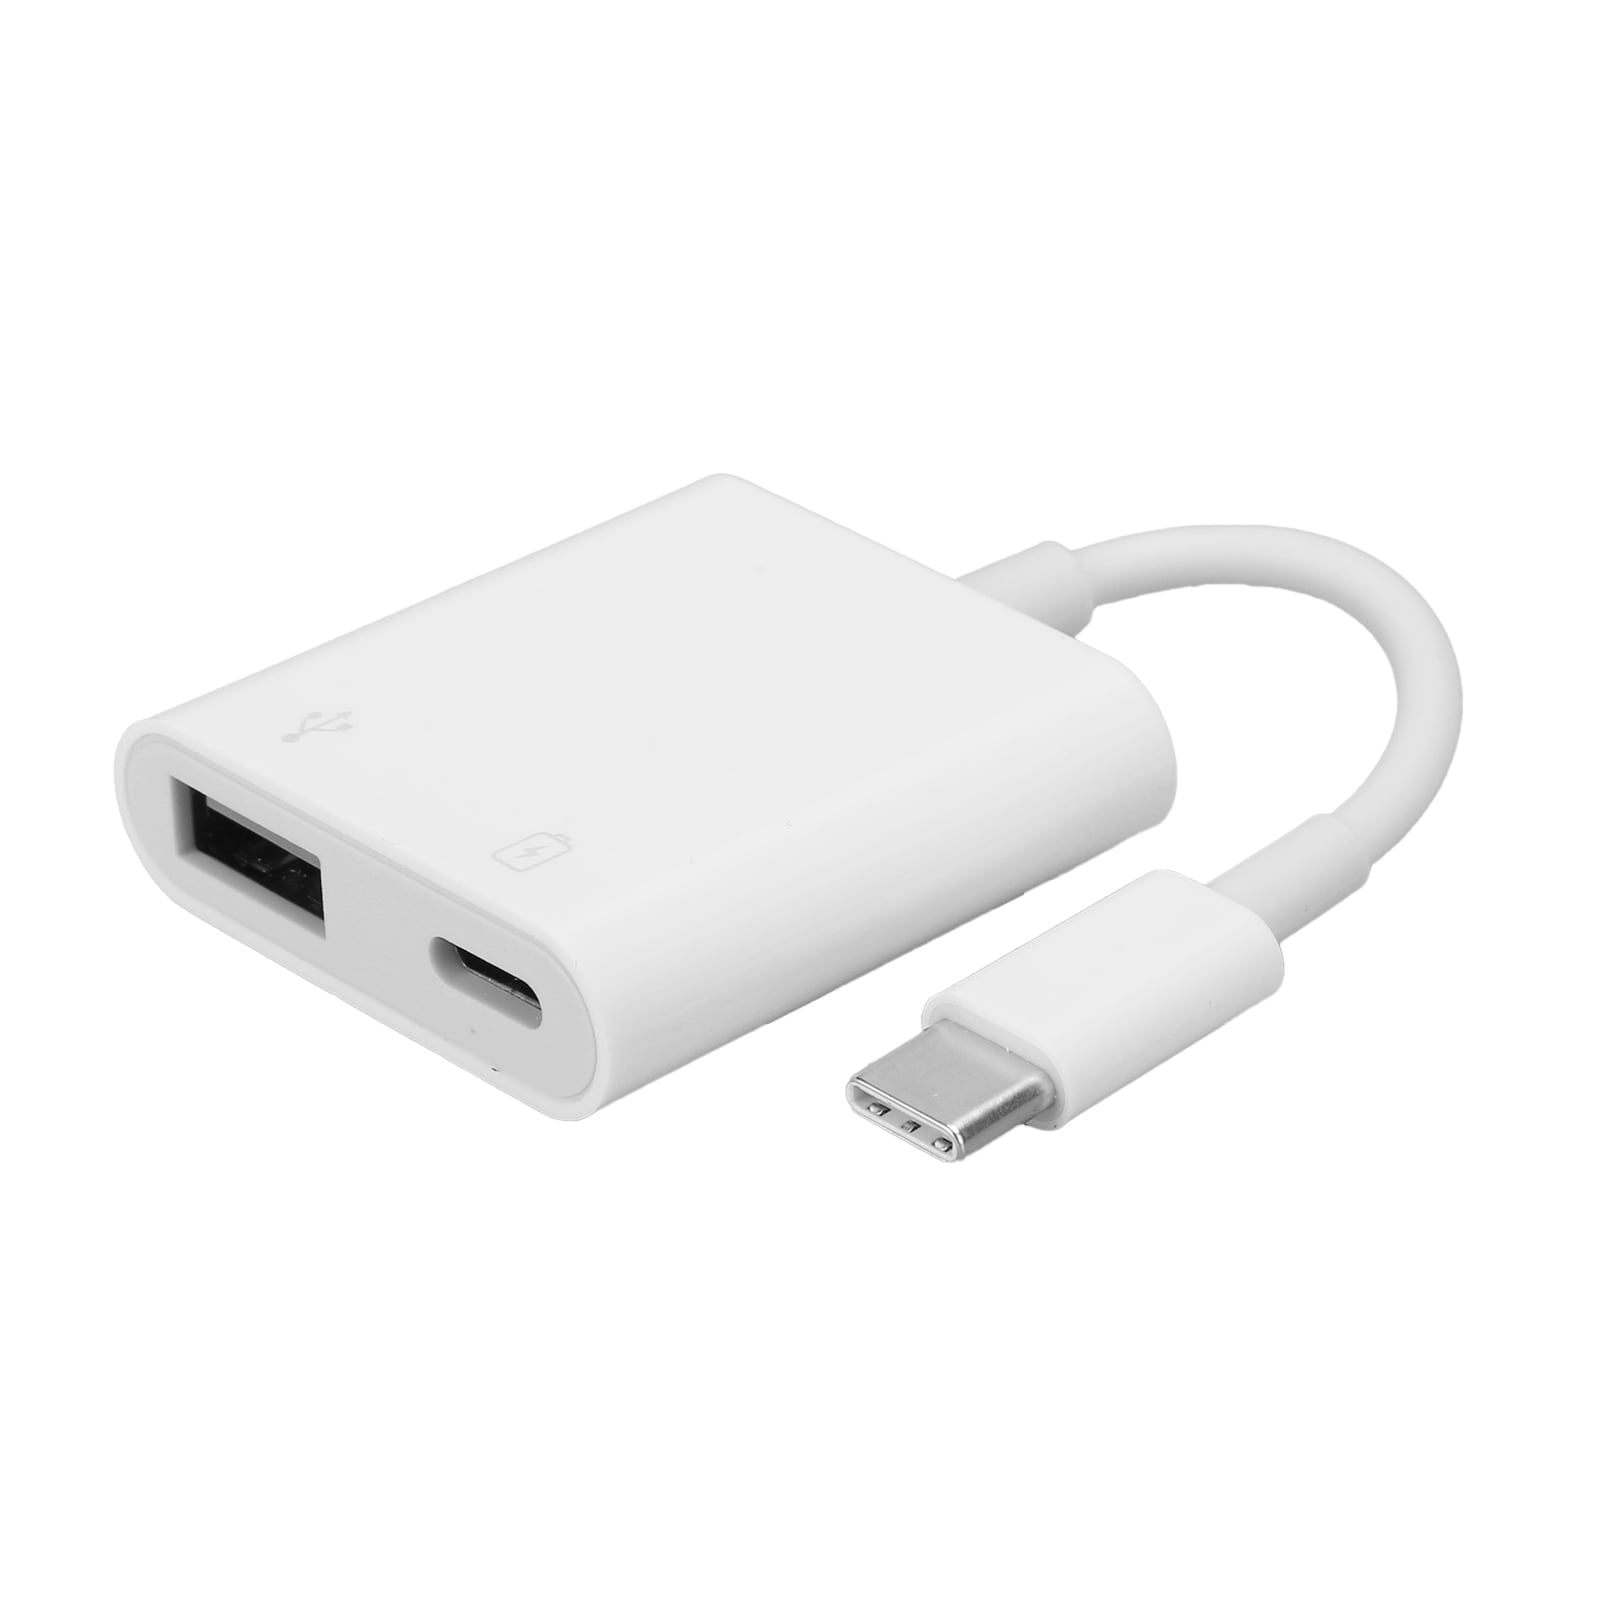 Type‑C to USB3.0 Adapter MH361 Type‑C OTG Converter Cable 2 in 1 USB C Male to USB Female and Charging Port Adapter Free Drive OTG Adapter Cable 